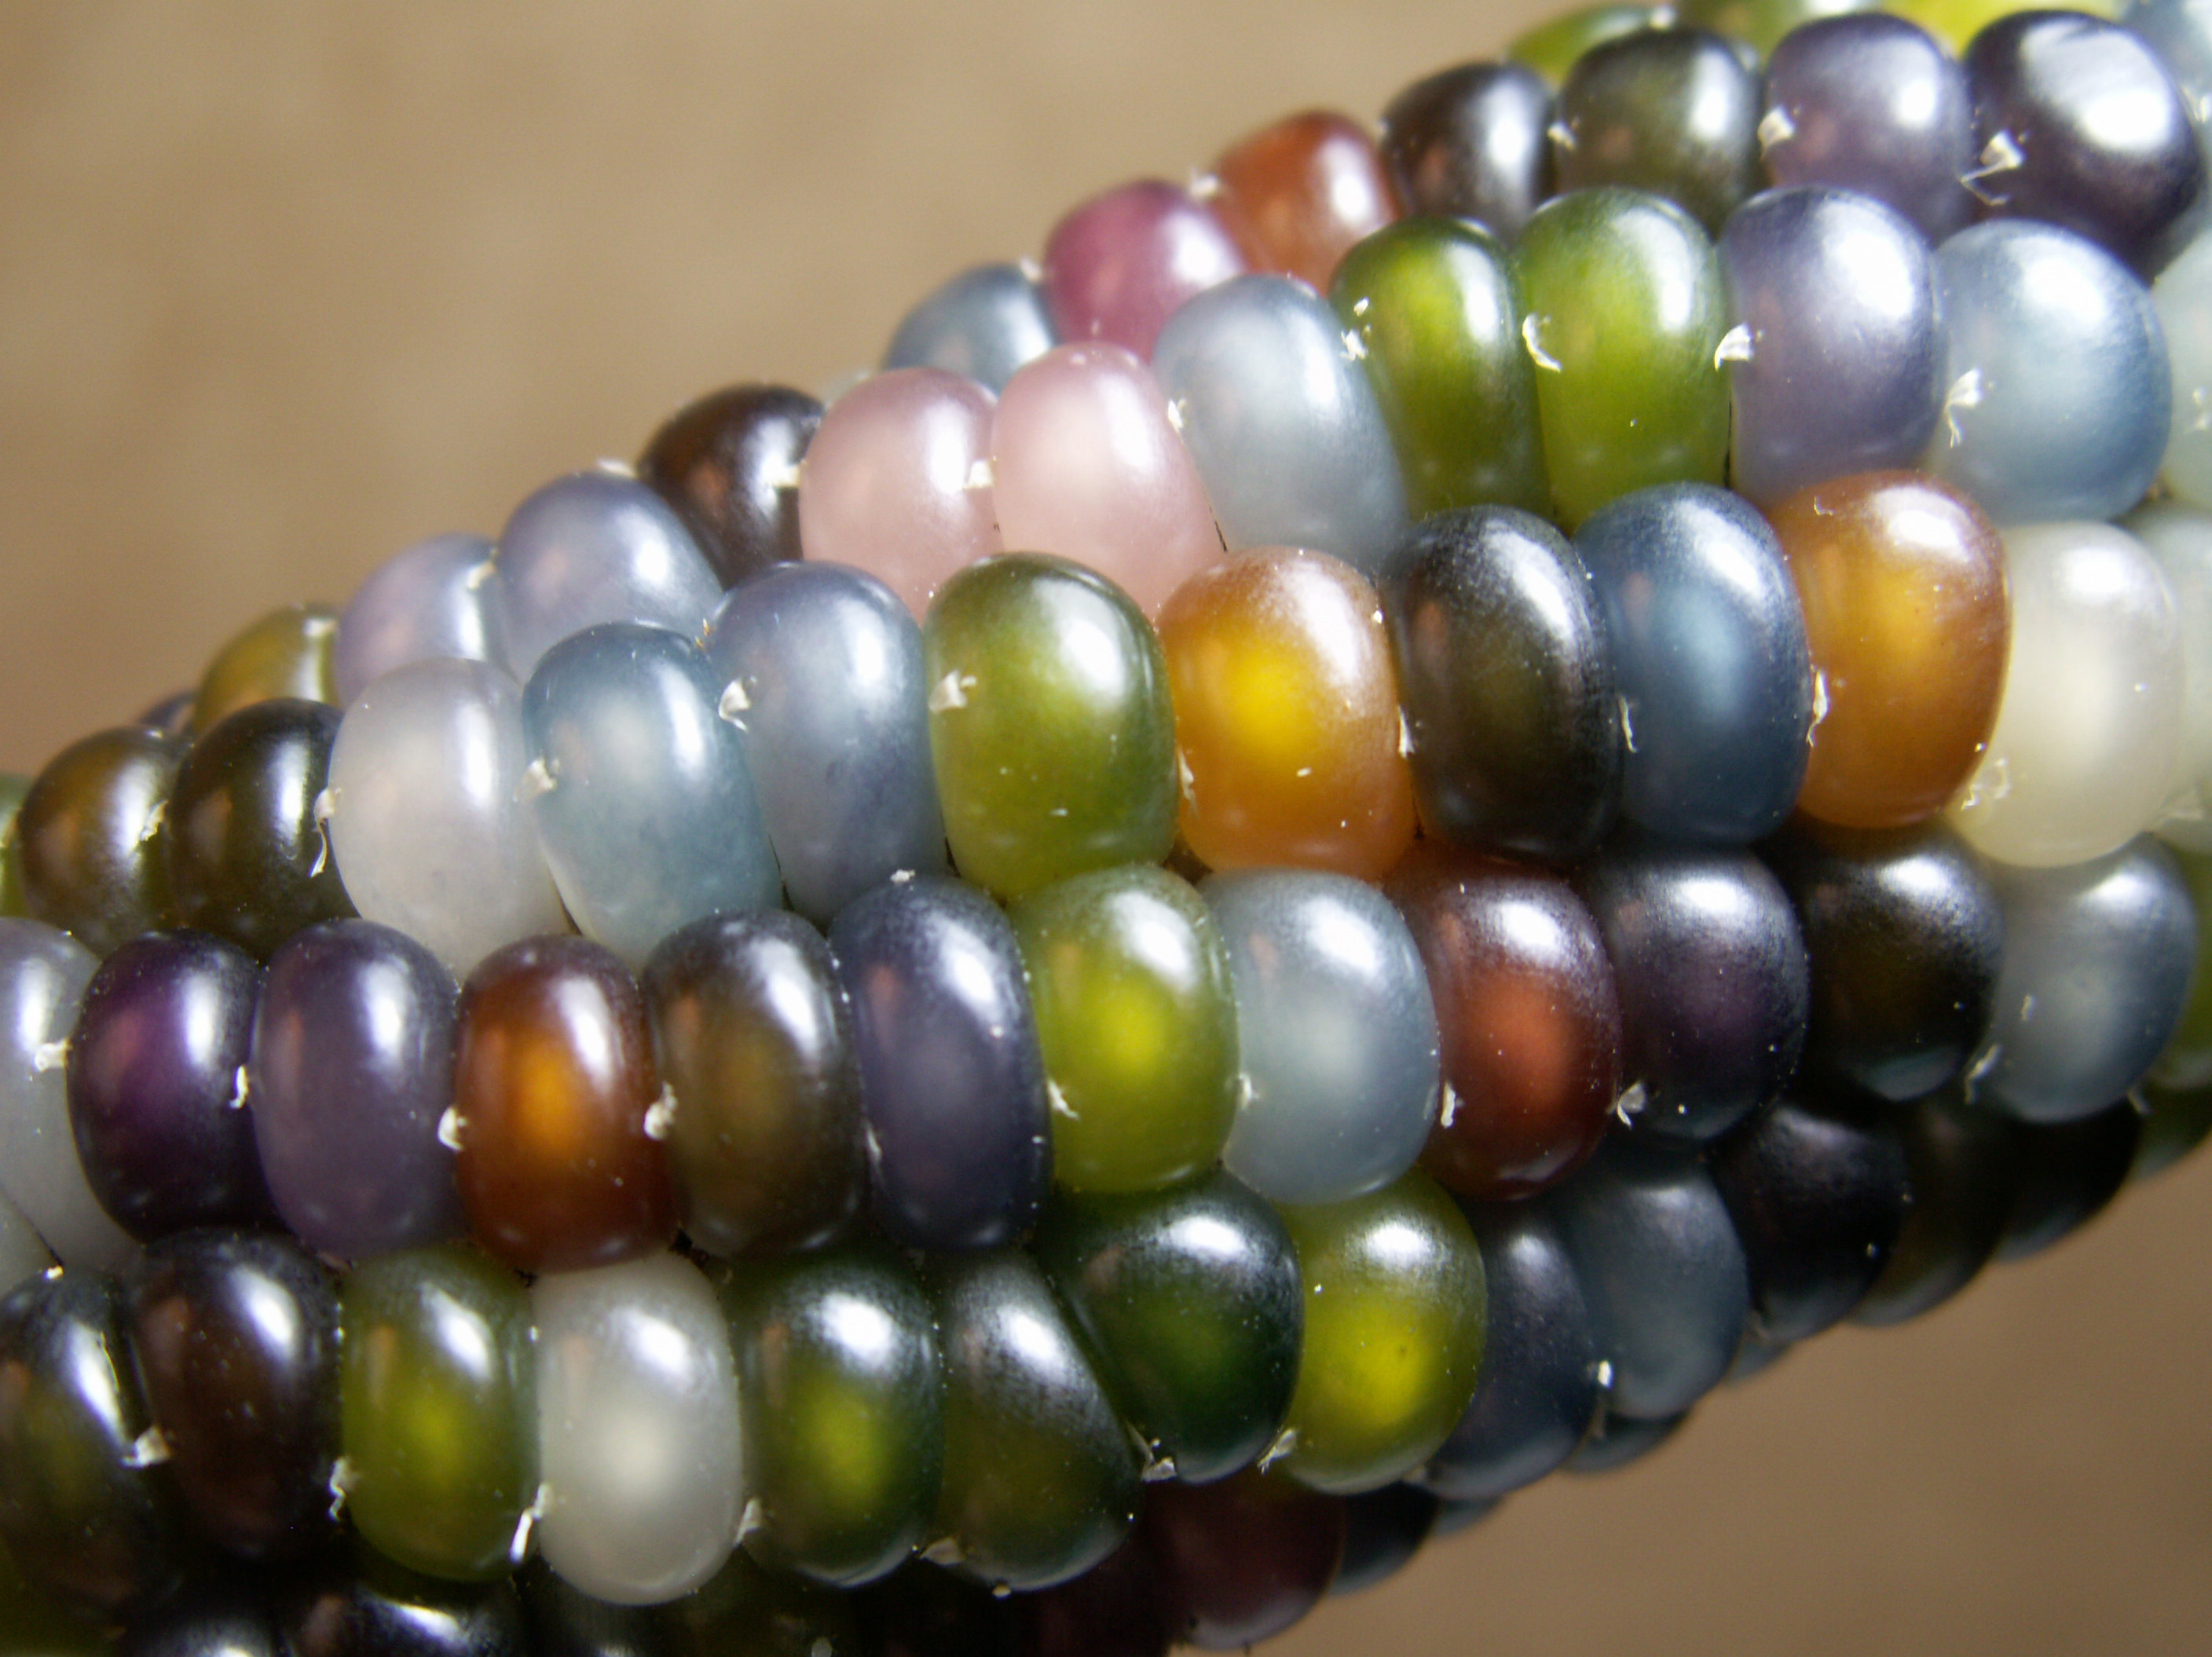 The nearly translucent Glass Gem Corn looks more like a work of art than a vegetable. Photo: Greg Schoen/Native Seeds